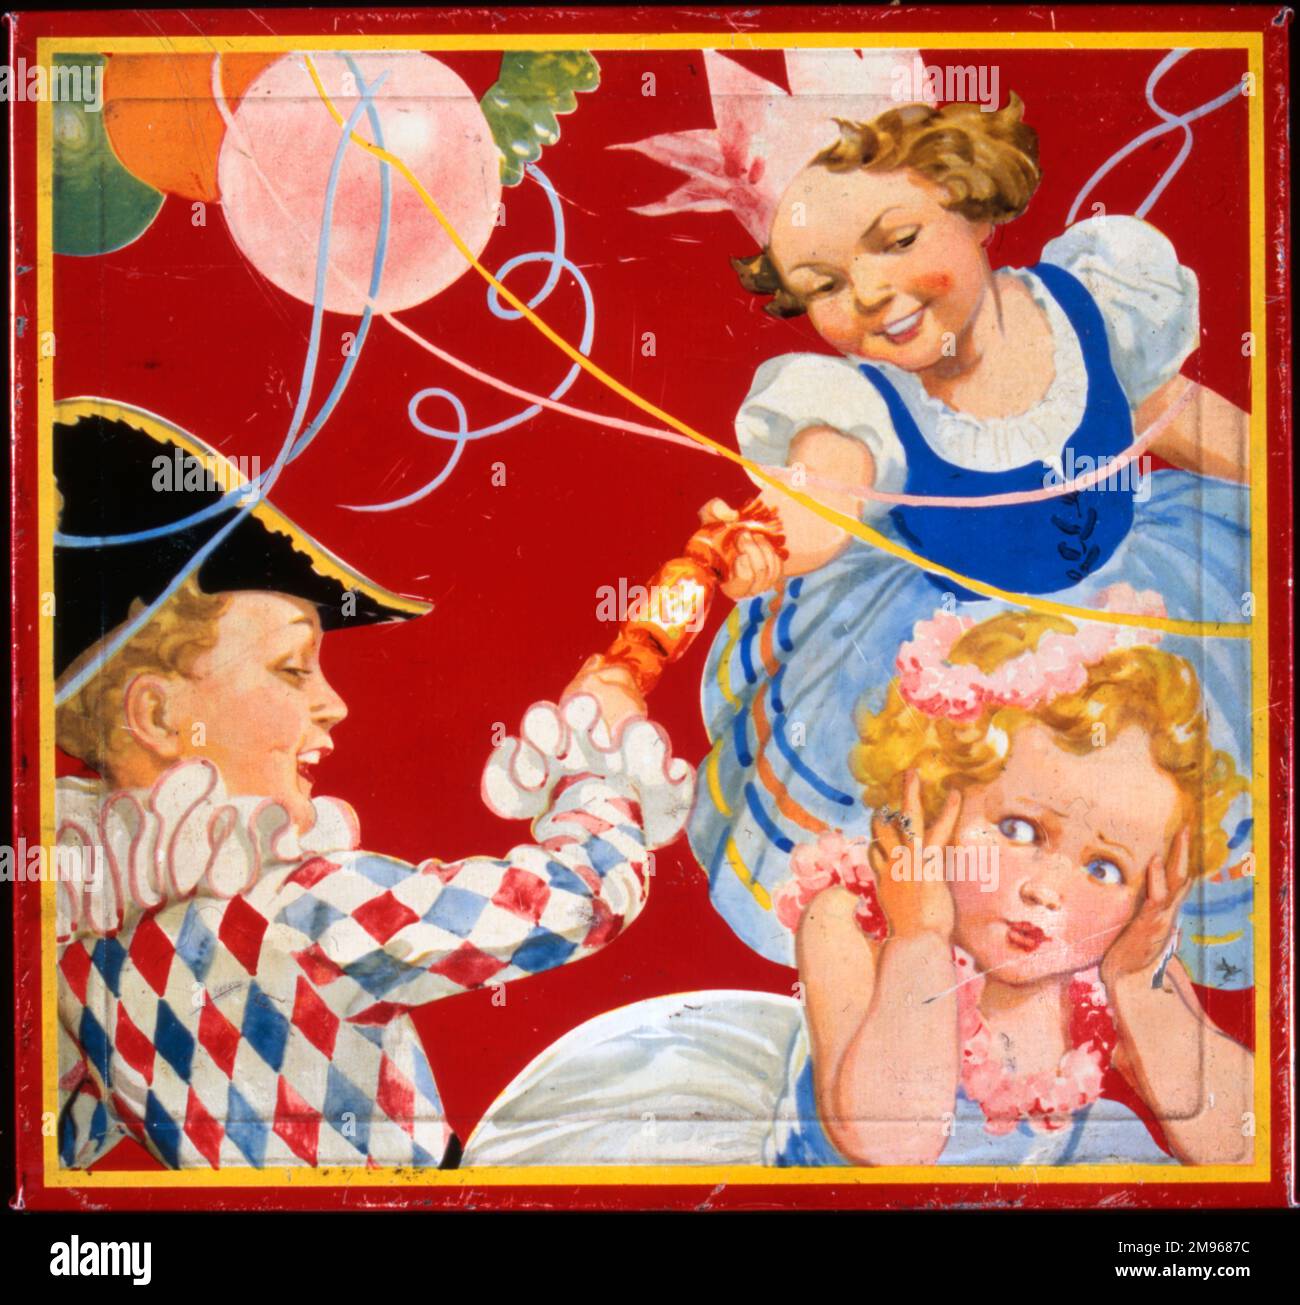 A jolly design for a box of Christmas crackers featuring three children; two are taking wicked enjoyment in pulling a cracker and frightening an innocent looking little blonde girl. Stock Photo